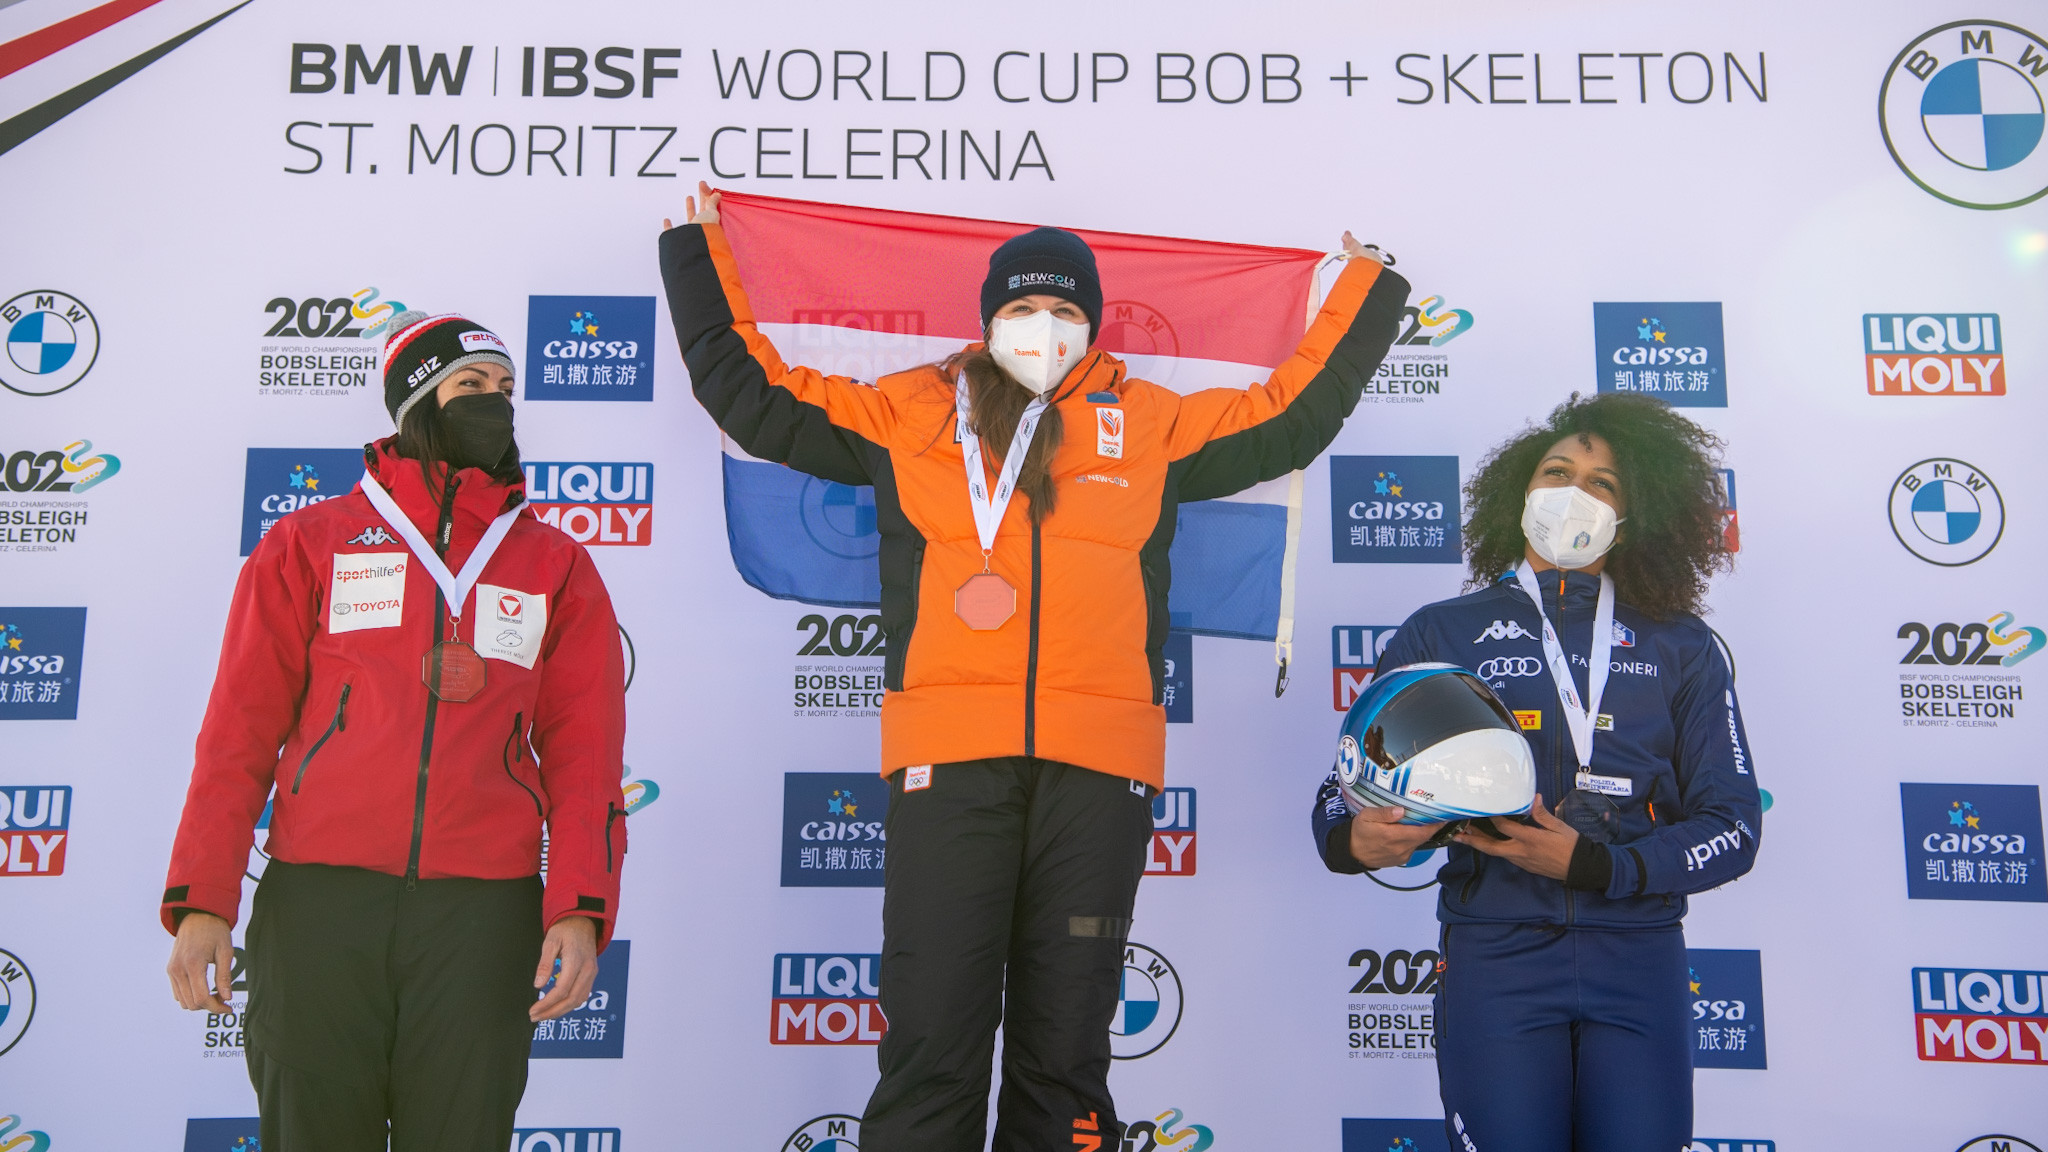 Kimberley Bos won her first IBSF World Cup in St Moritz ©IBSF